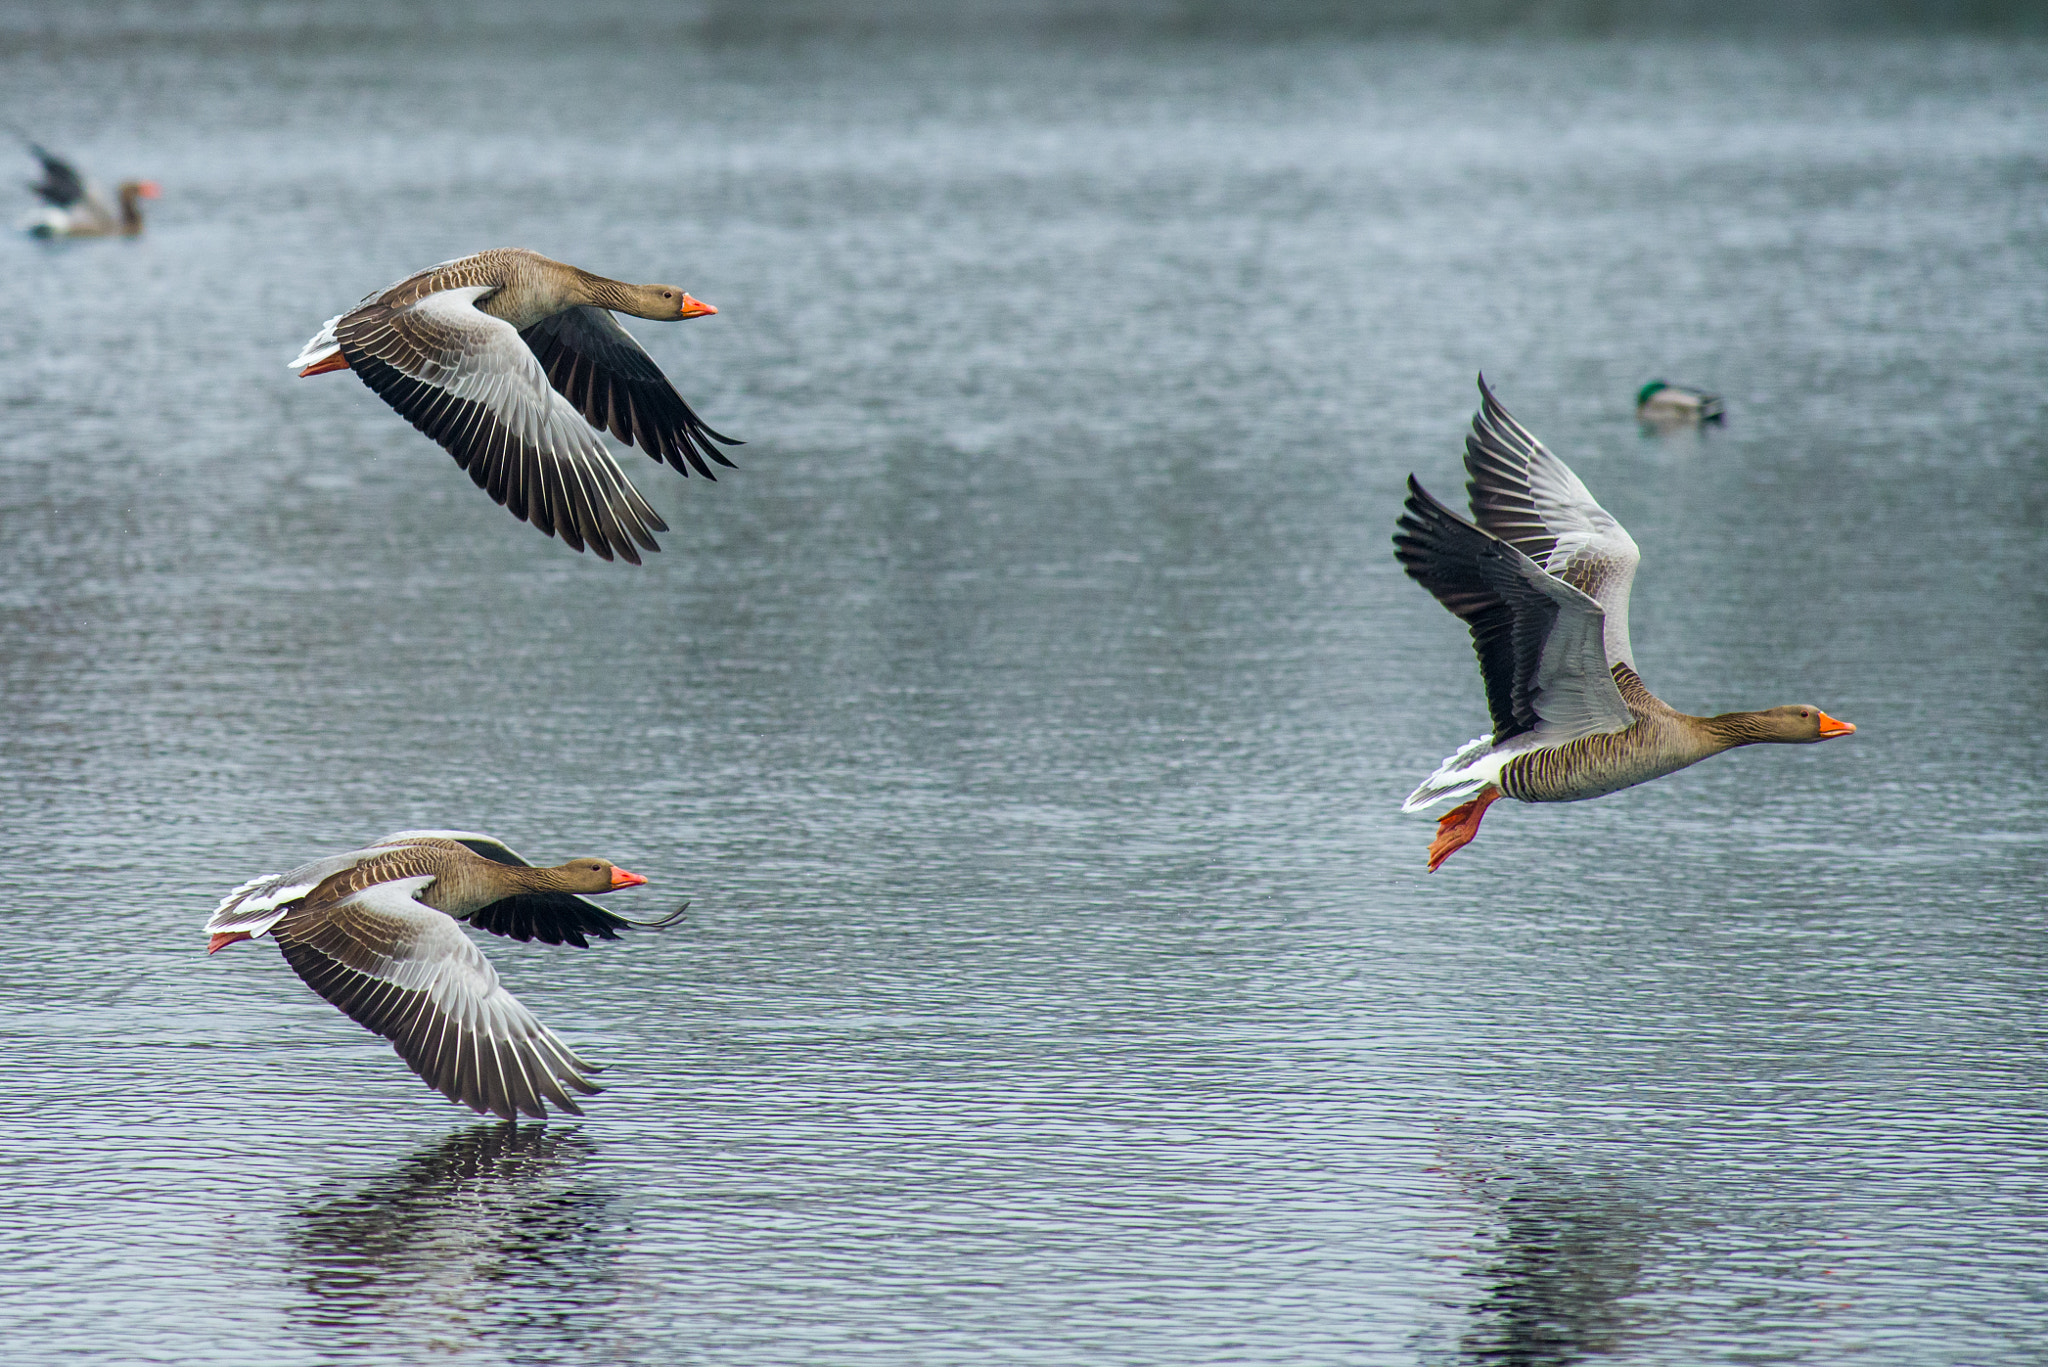 Pentax K-1 sample photo. More geese photography